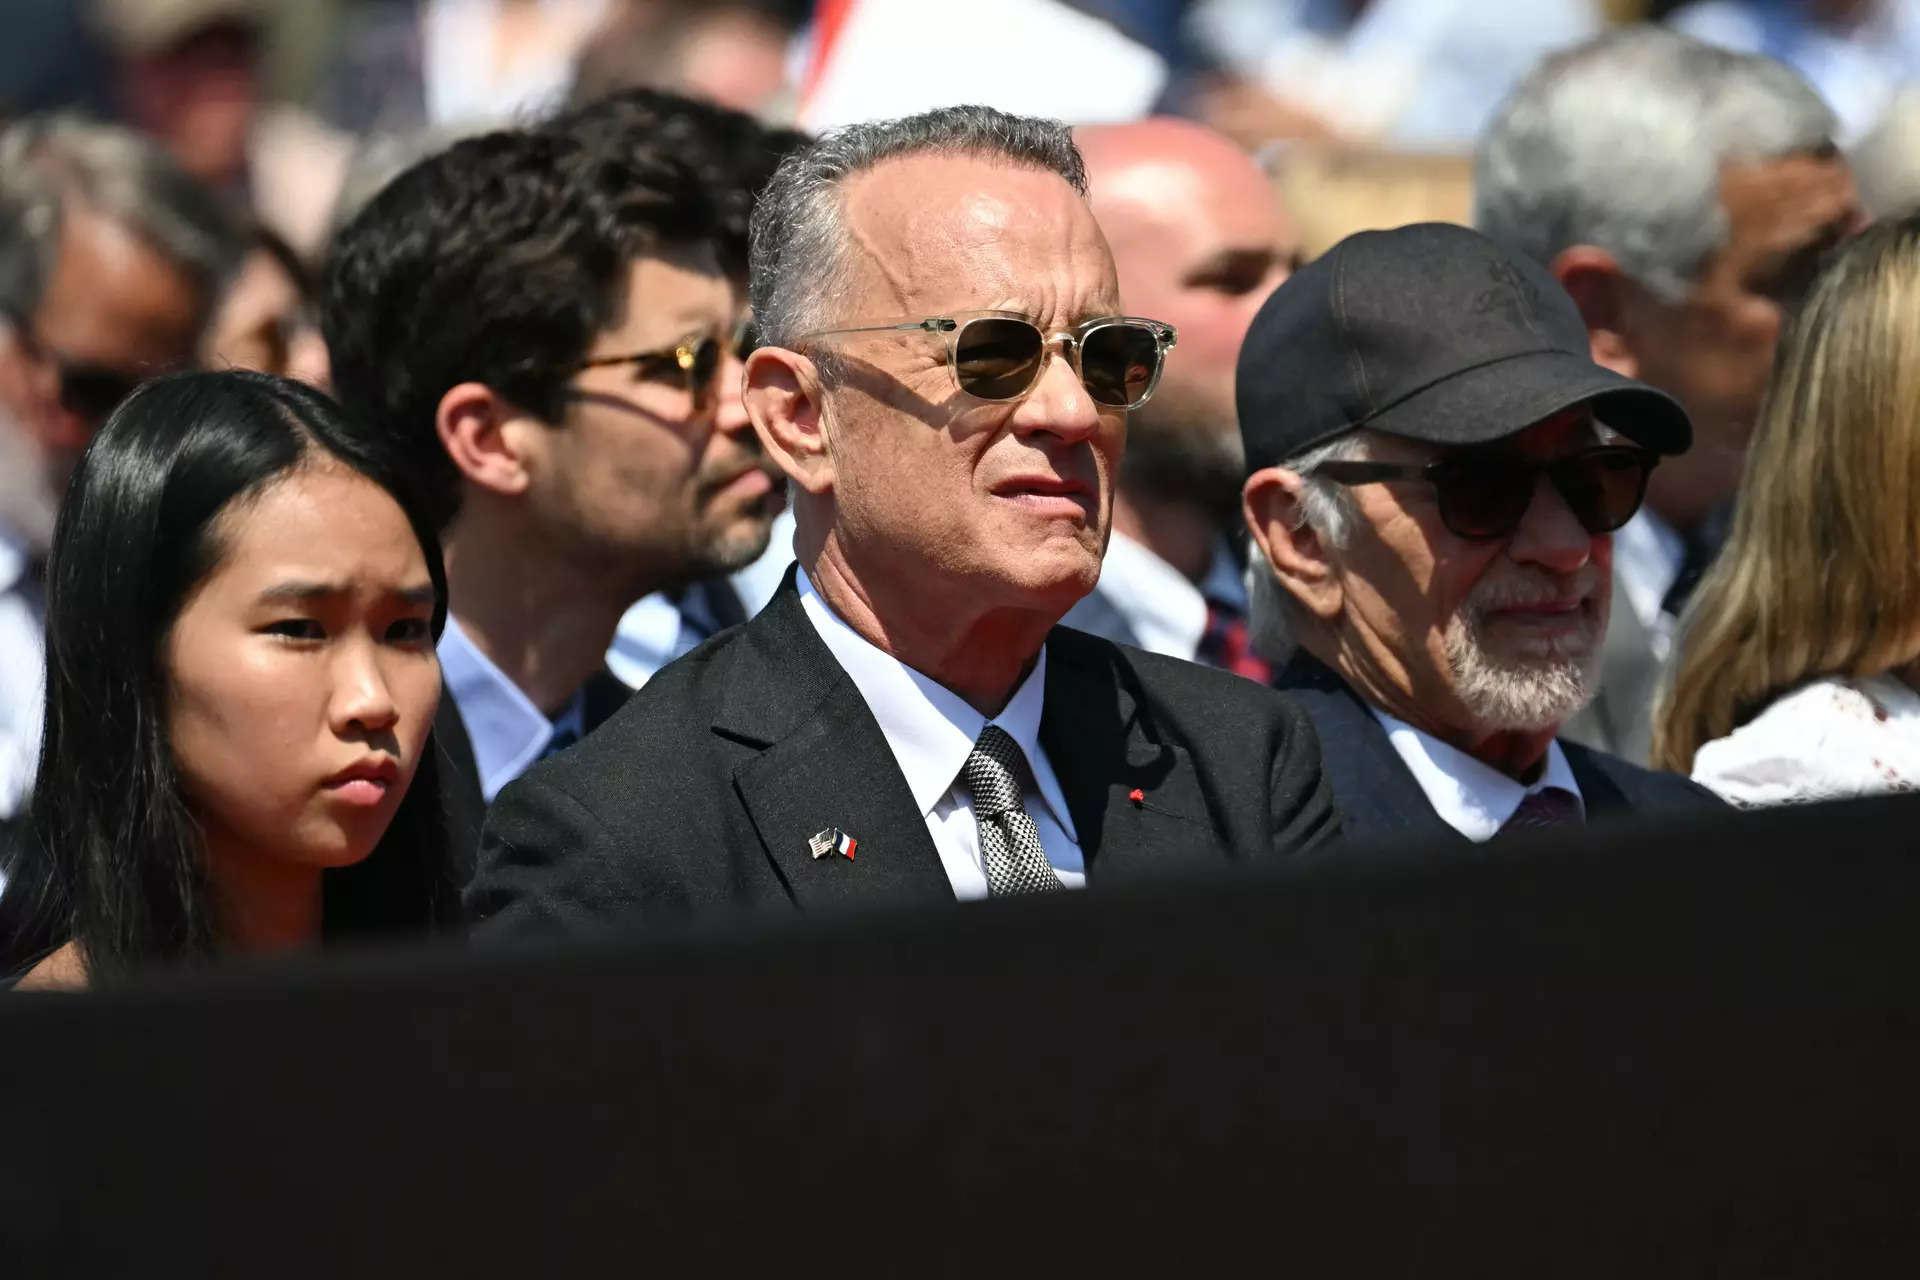 Tom Hanks' new film with 'Forrest Gump' director 'Here': Release date, cast, plot and more 